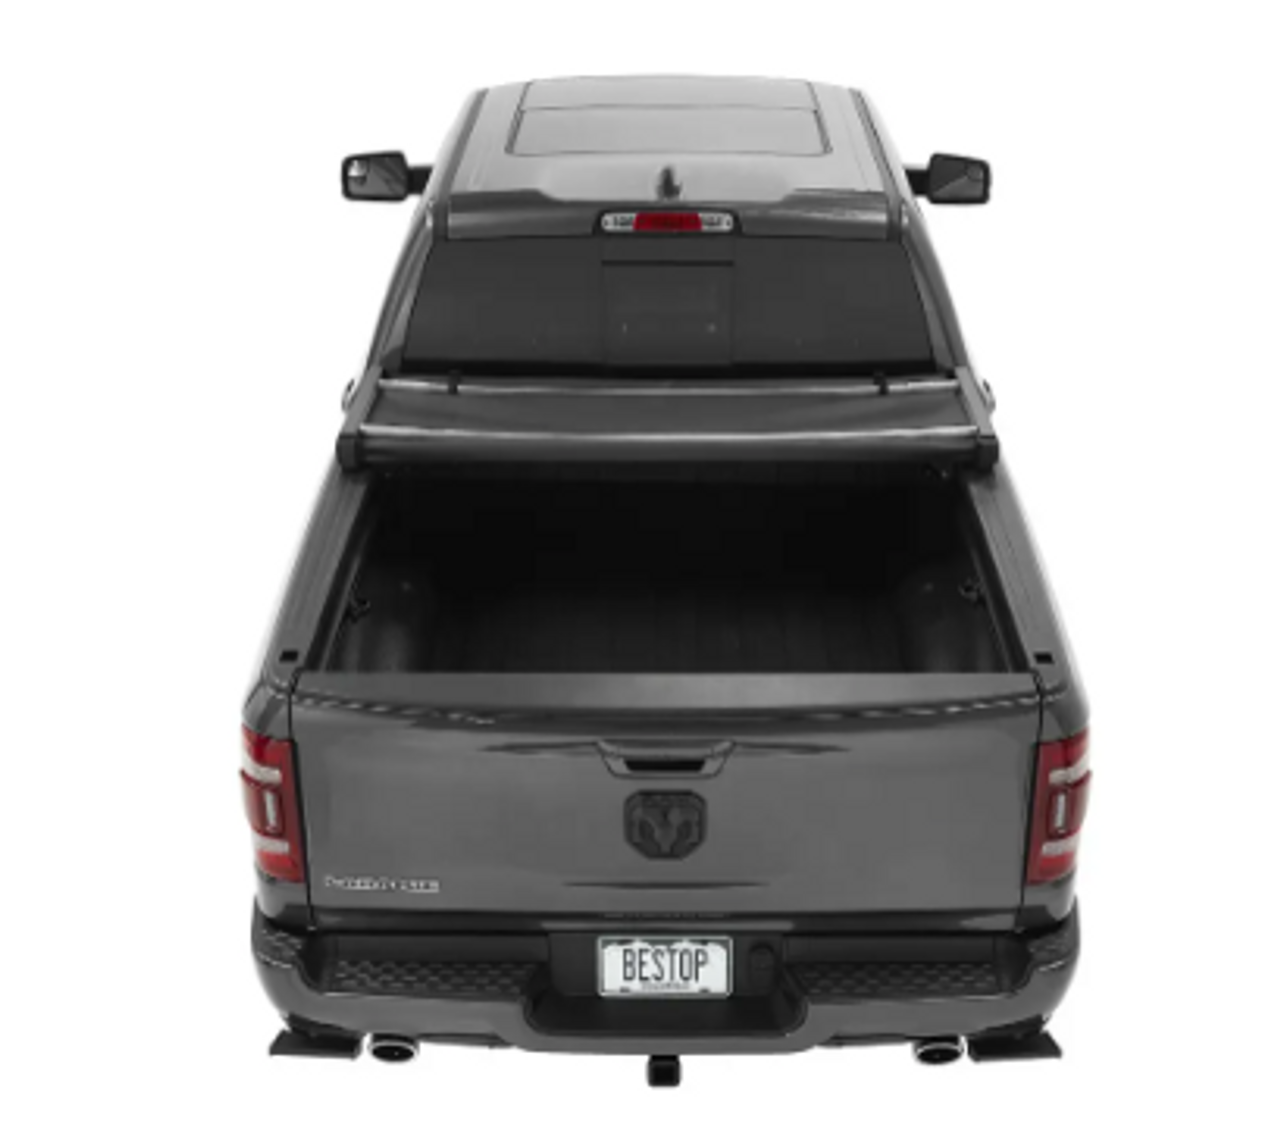 Bestop 16227-01 EZ-Fold Soft Tri-Fold Tonneau Cover for Ram 1500 2019+ with 5.7 ft Bed